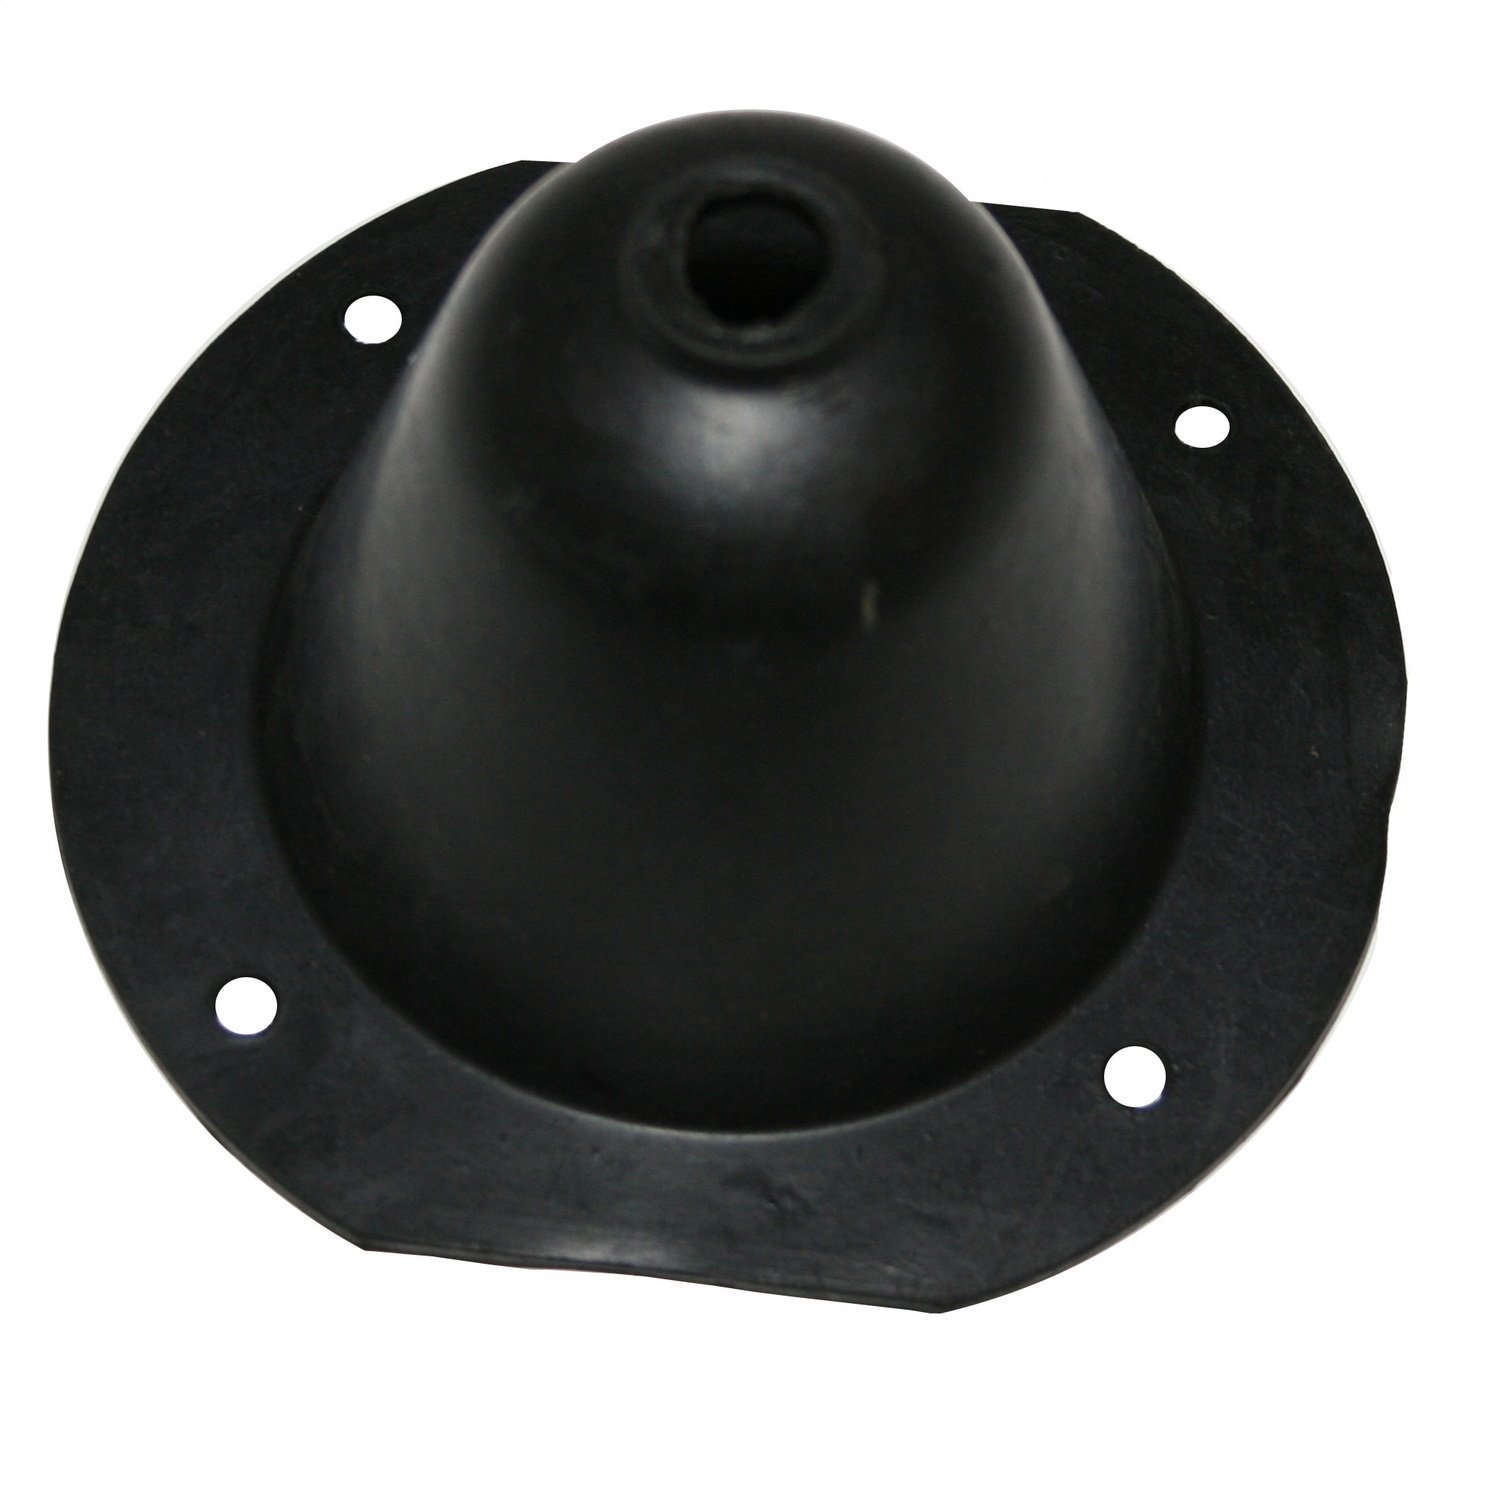 Manual Transmission Shifter Boot for T90 transmissions in